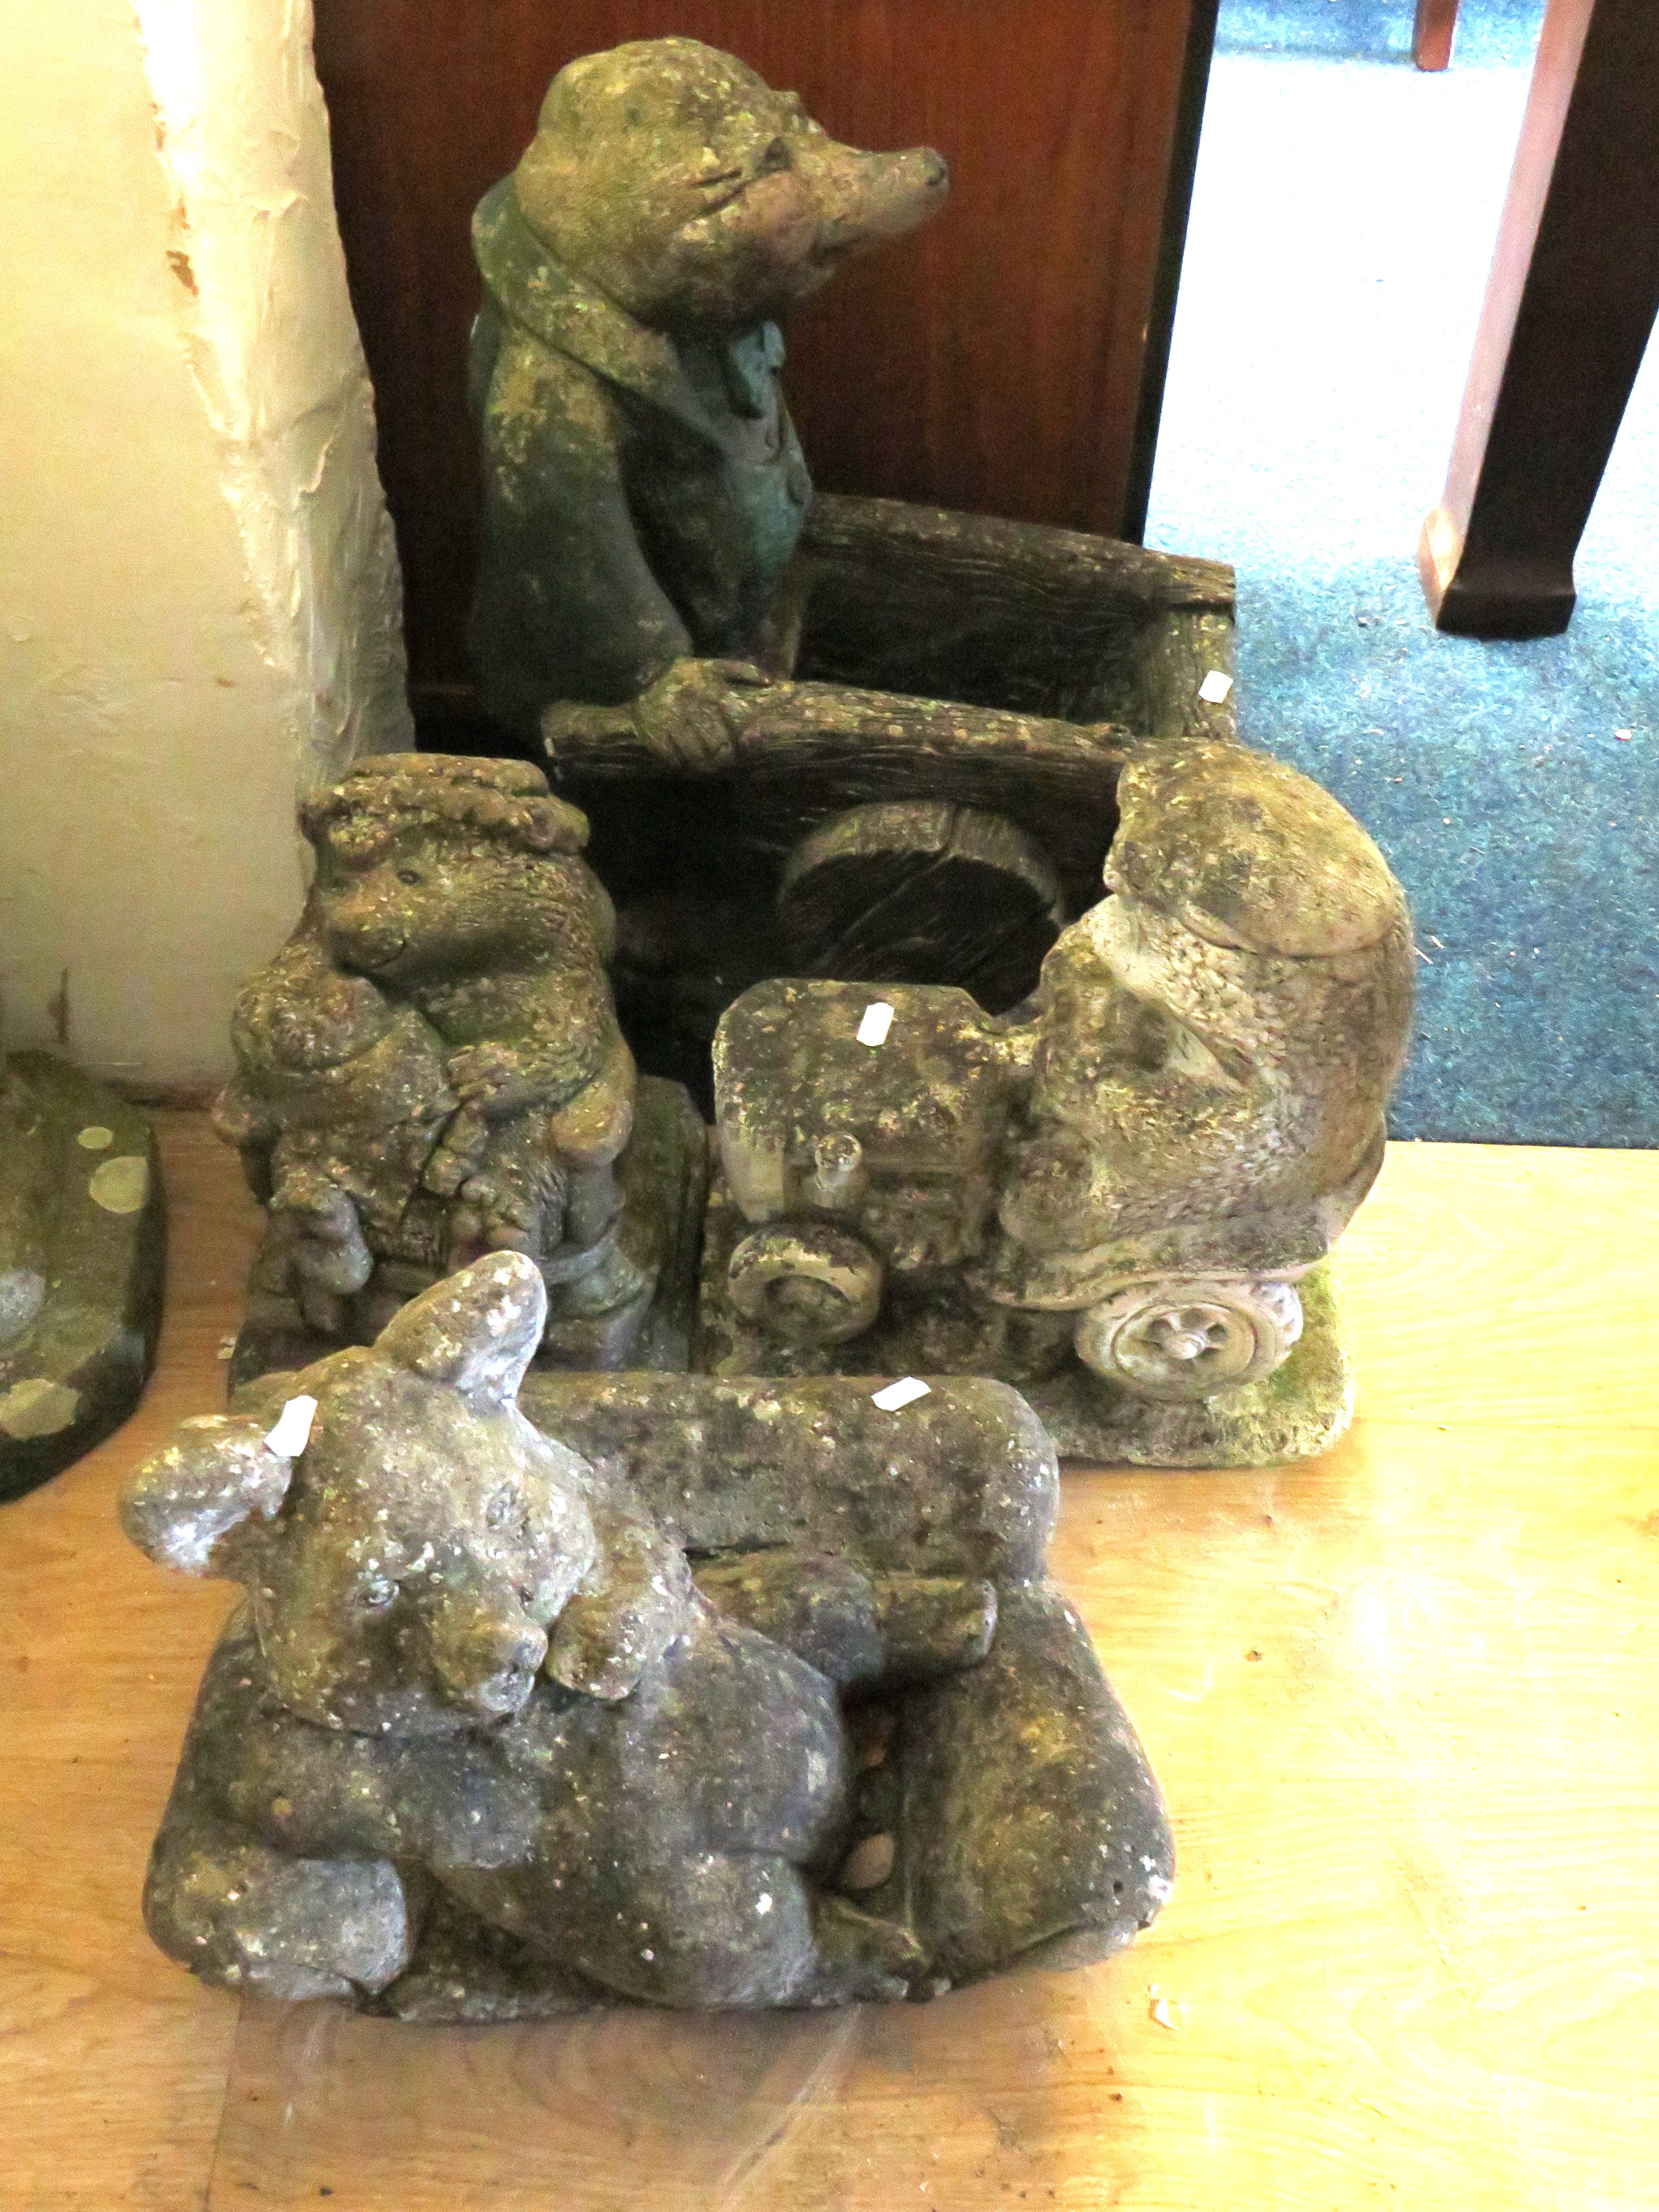 Four stone novelty Garden Stone Animal Ornaments. Largest measures approx  20 inches tall.   (These 